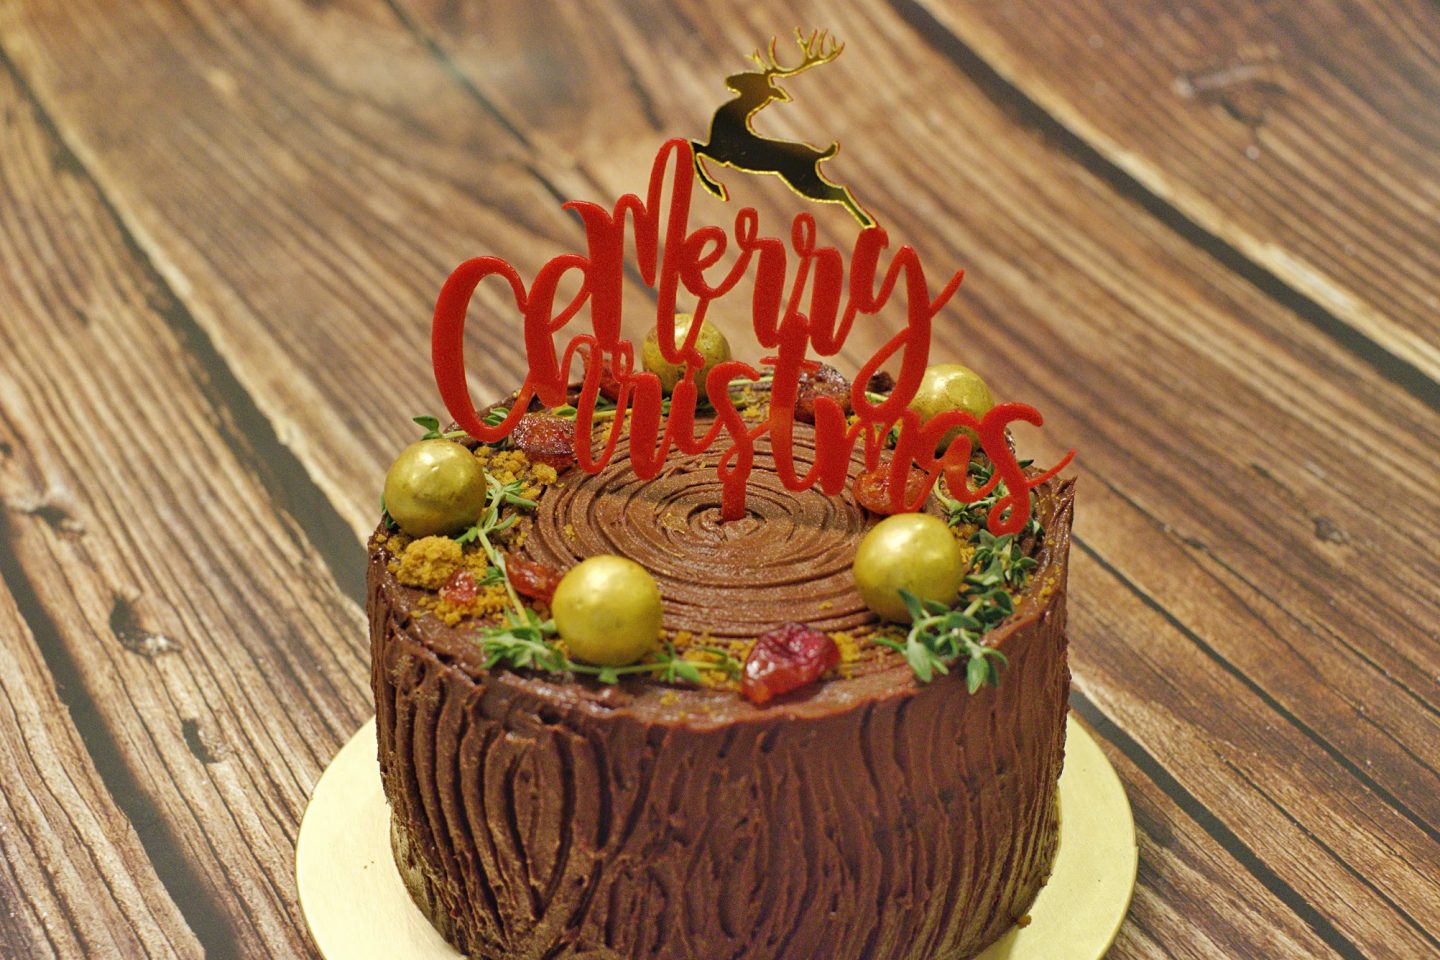 A chocolate stump cake by Joanna's Oven.